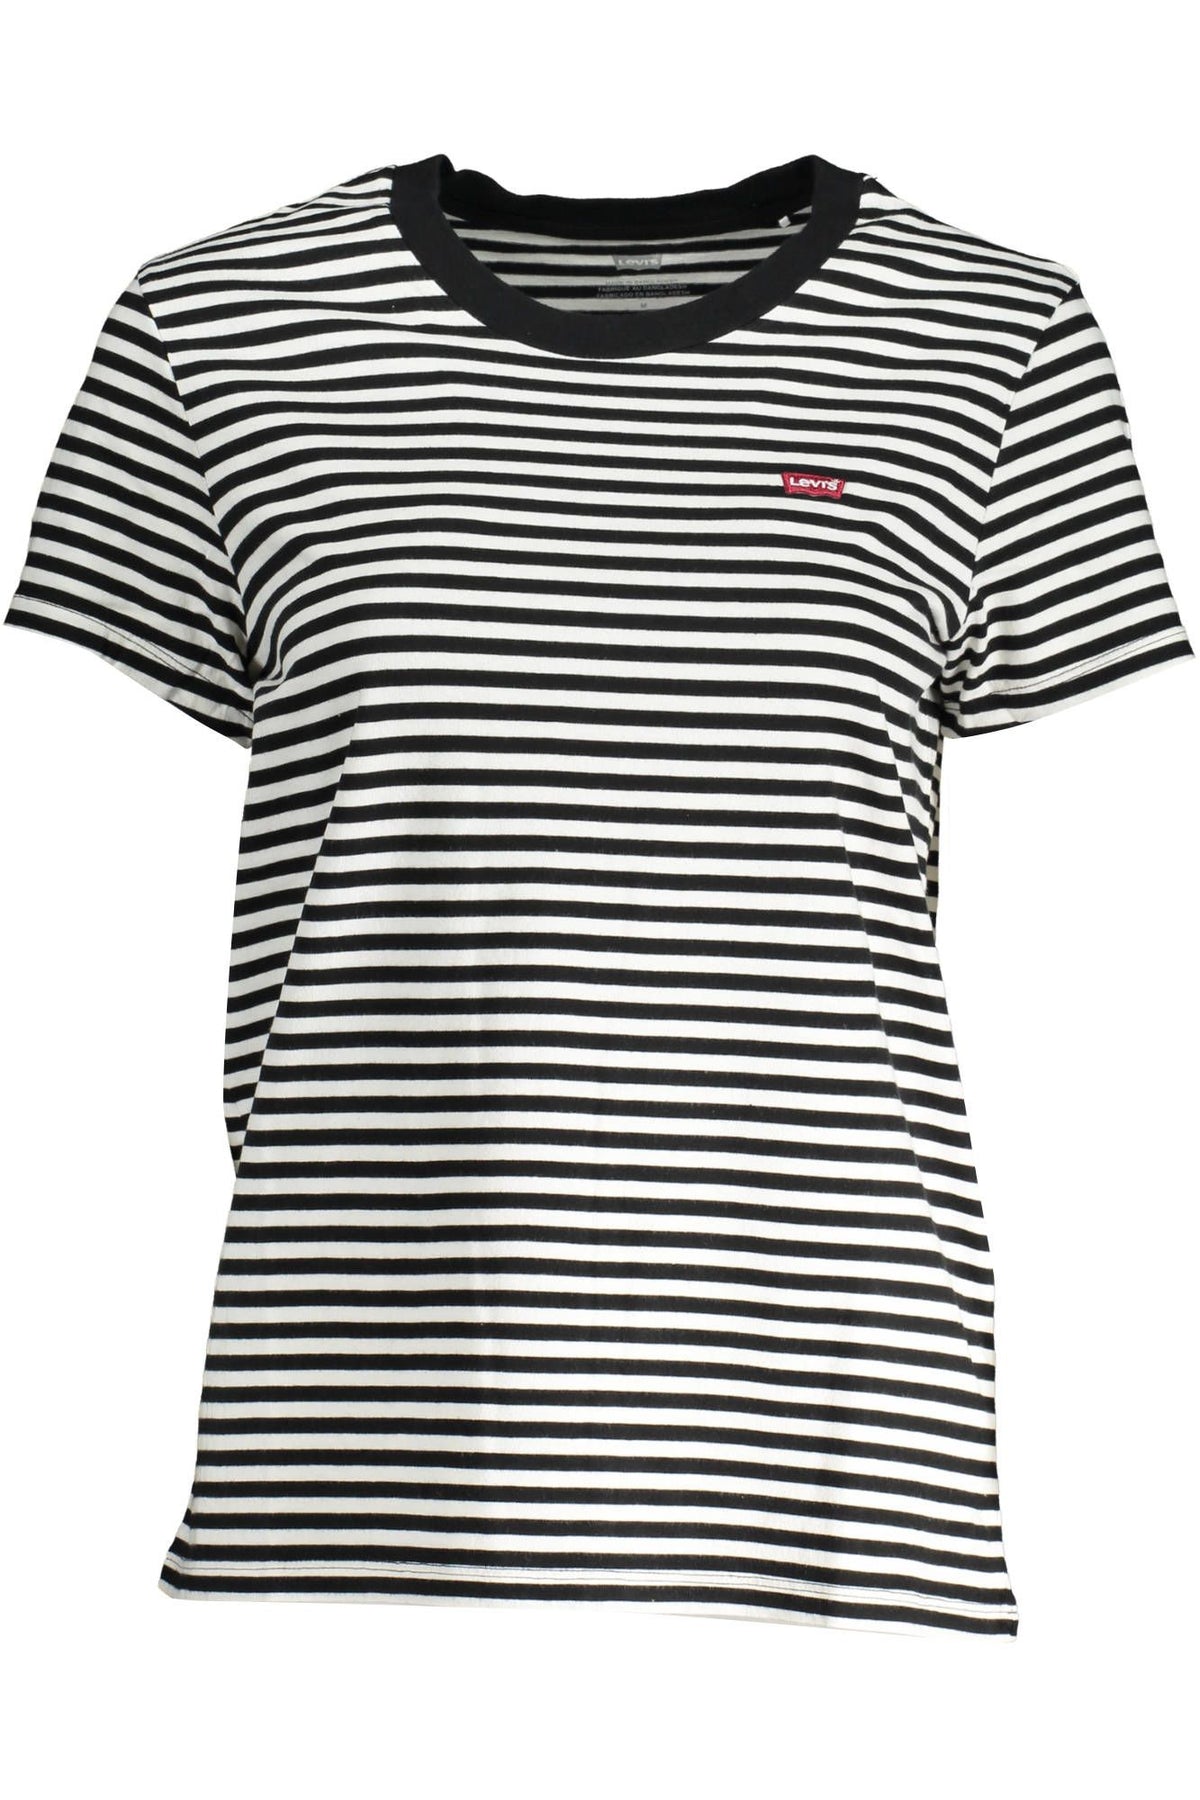 Levi's Chic Black Cotton Tee with Classic Logo